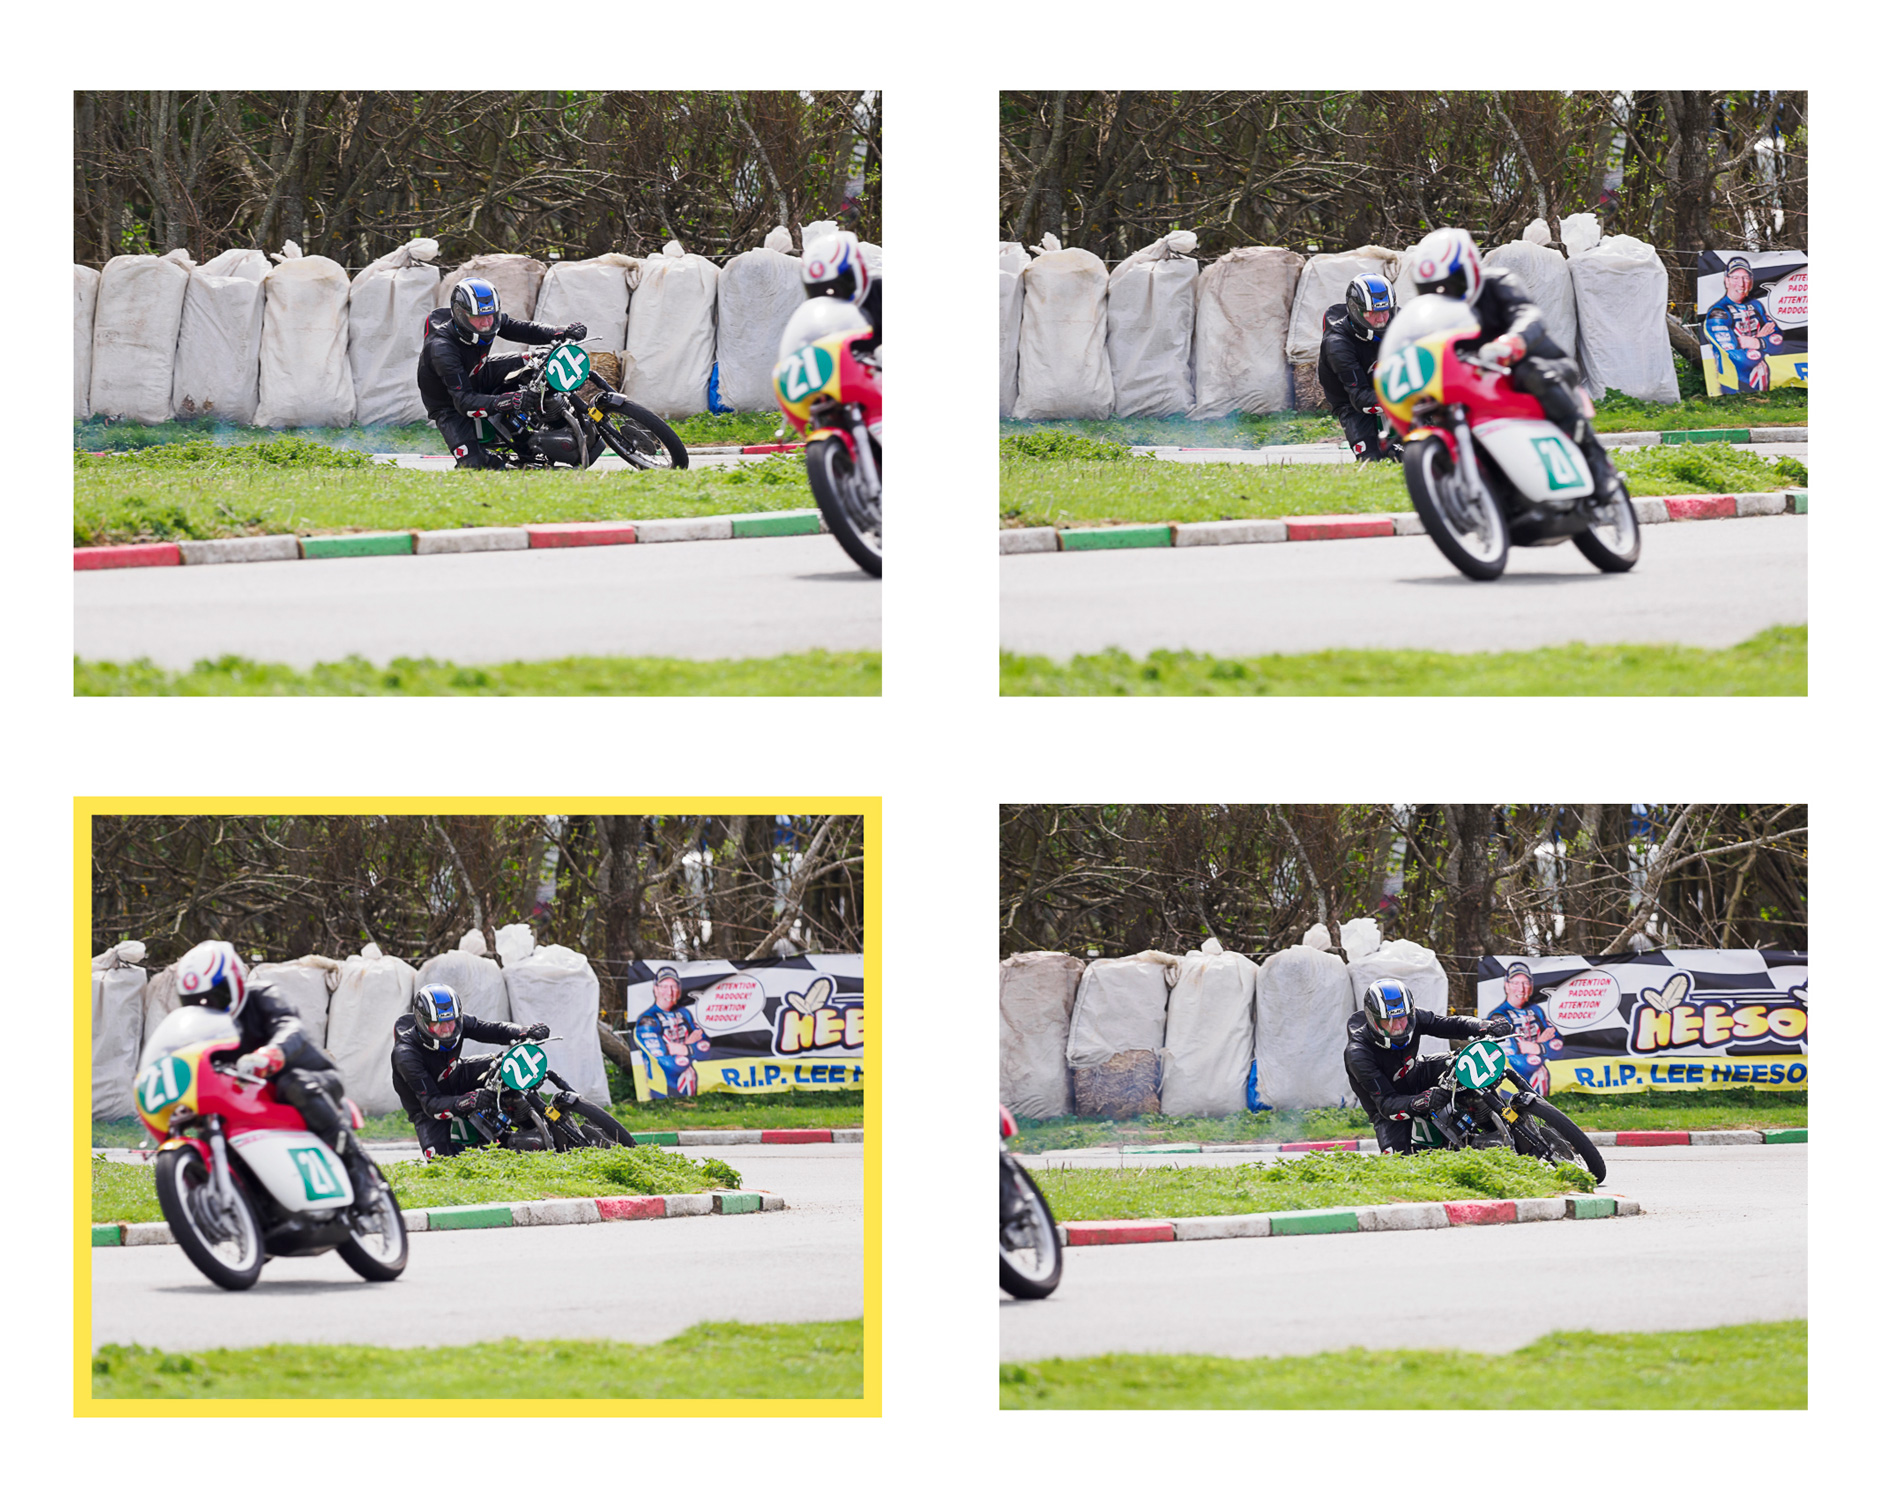 sequence of four frames with a biker racer being covered by another bike in the foreground momentarily